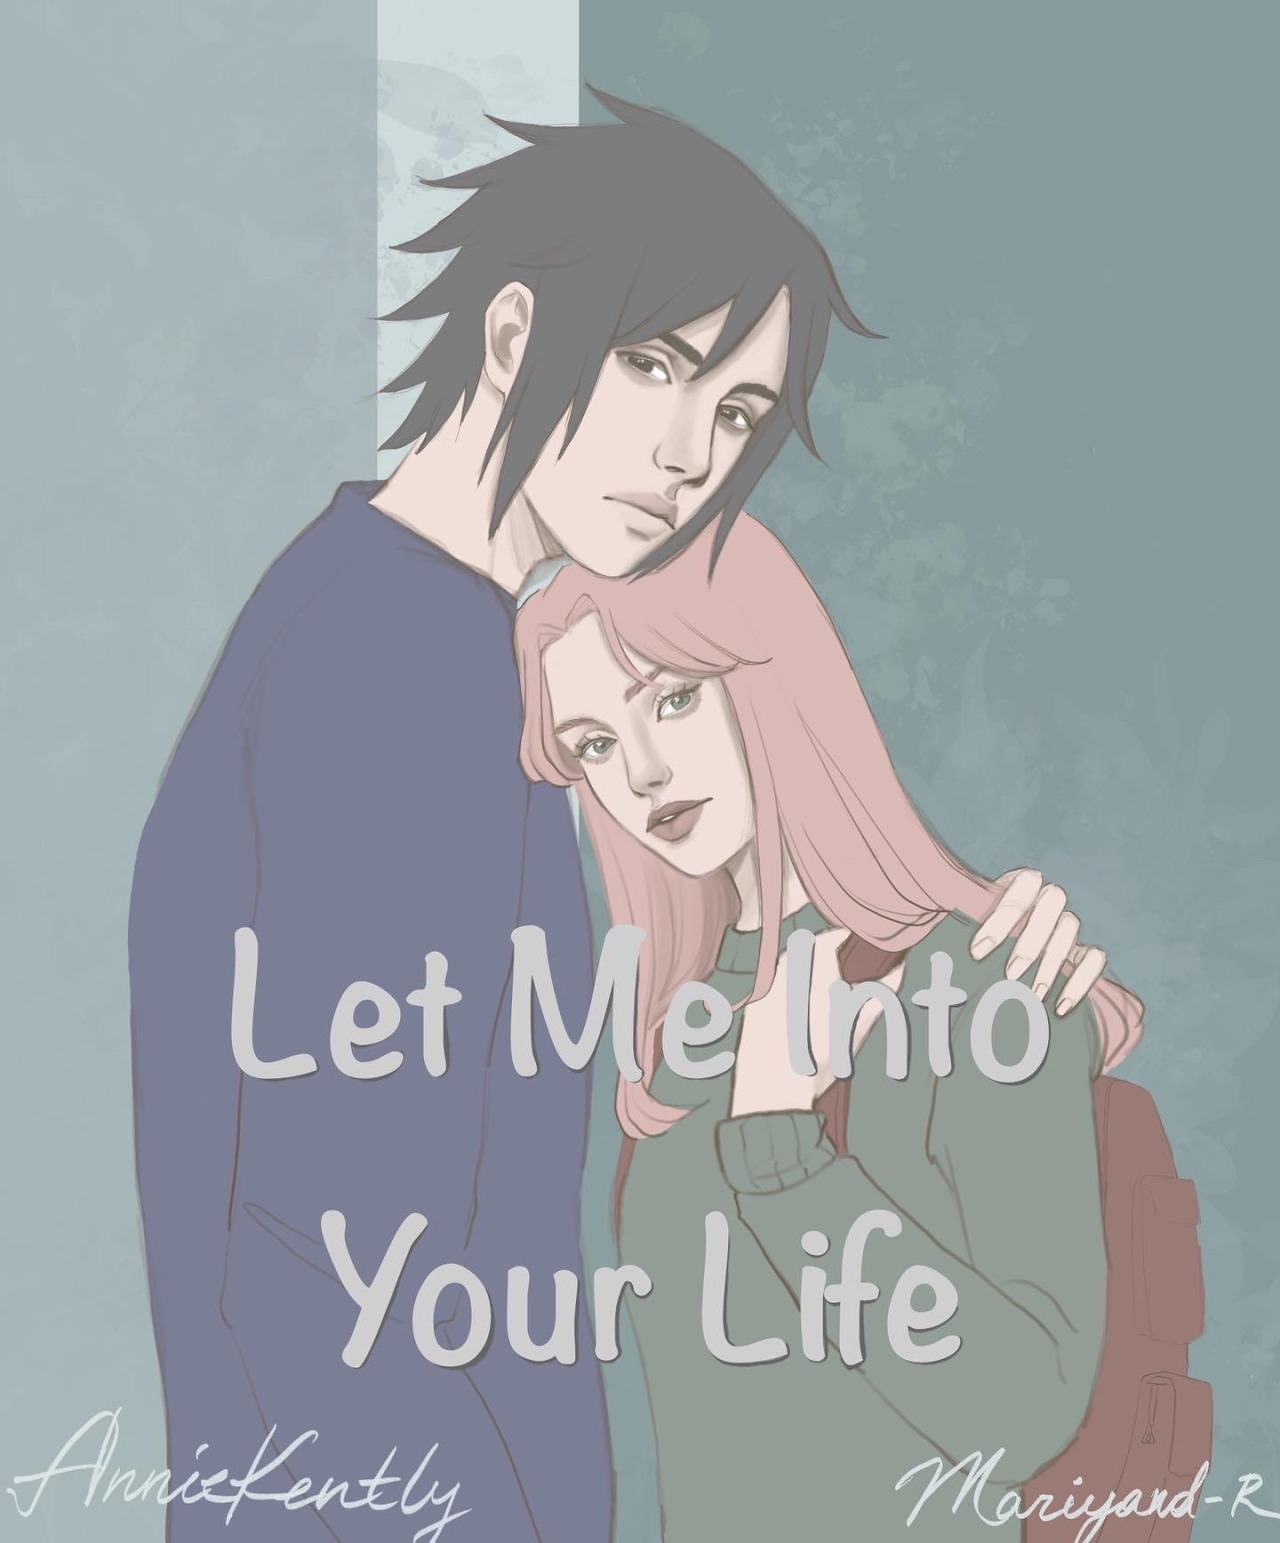 The life and Destiny of Sarada Uchiha - Issues with Training - Page 2 -  Wattpad